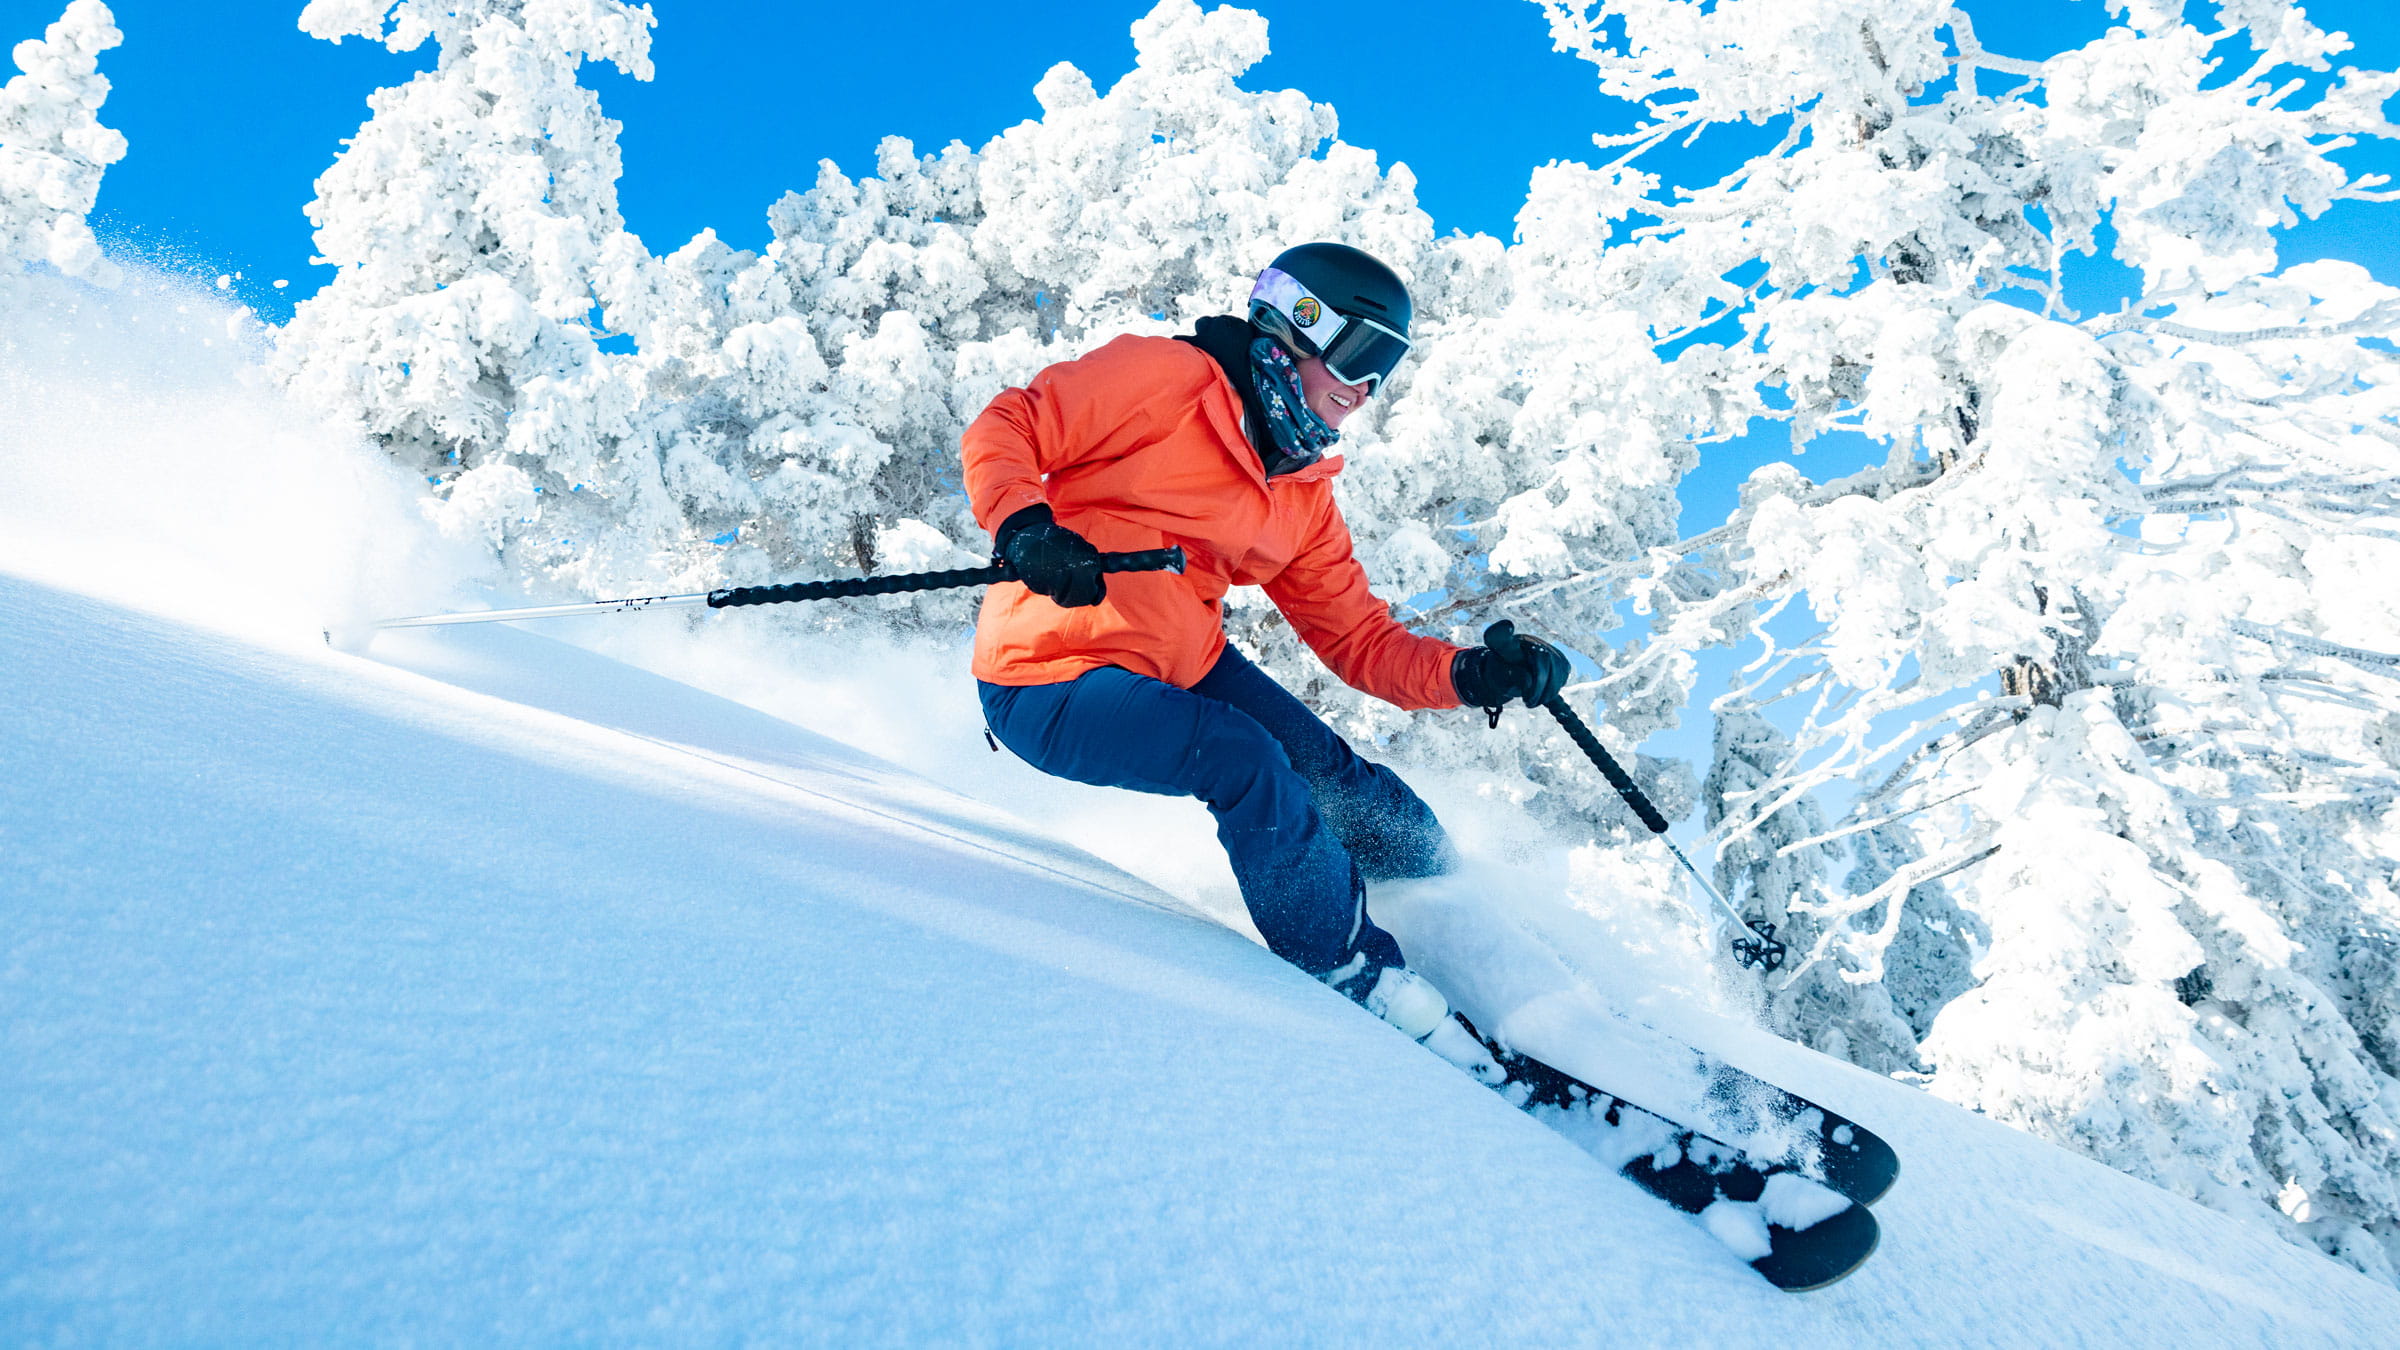 skier going downhill on a ski slope on a bluebird day with white trees